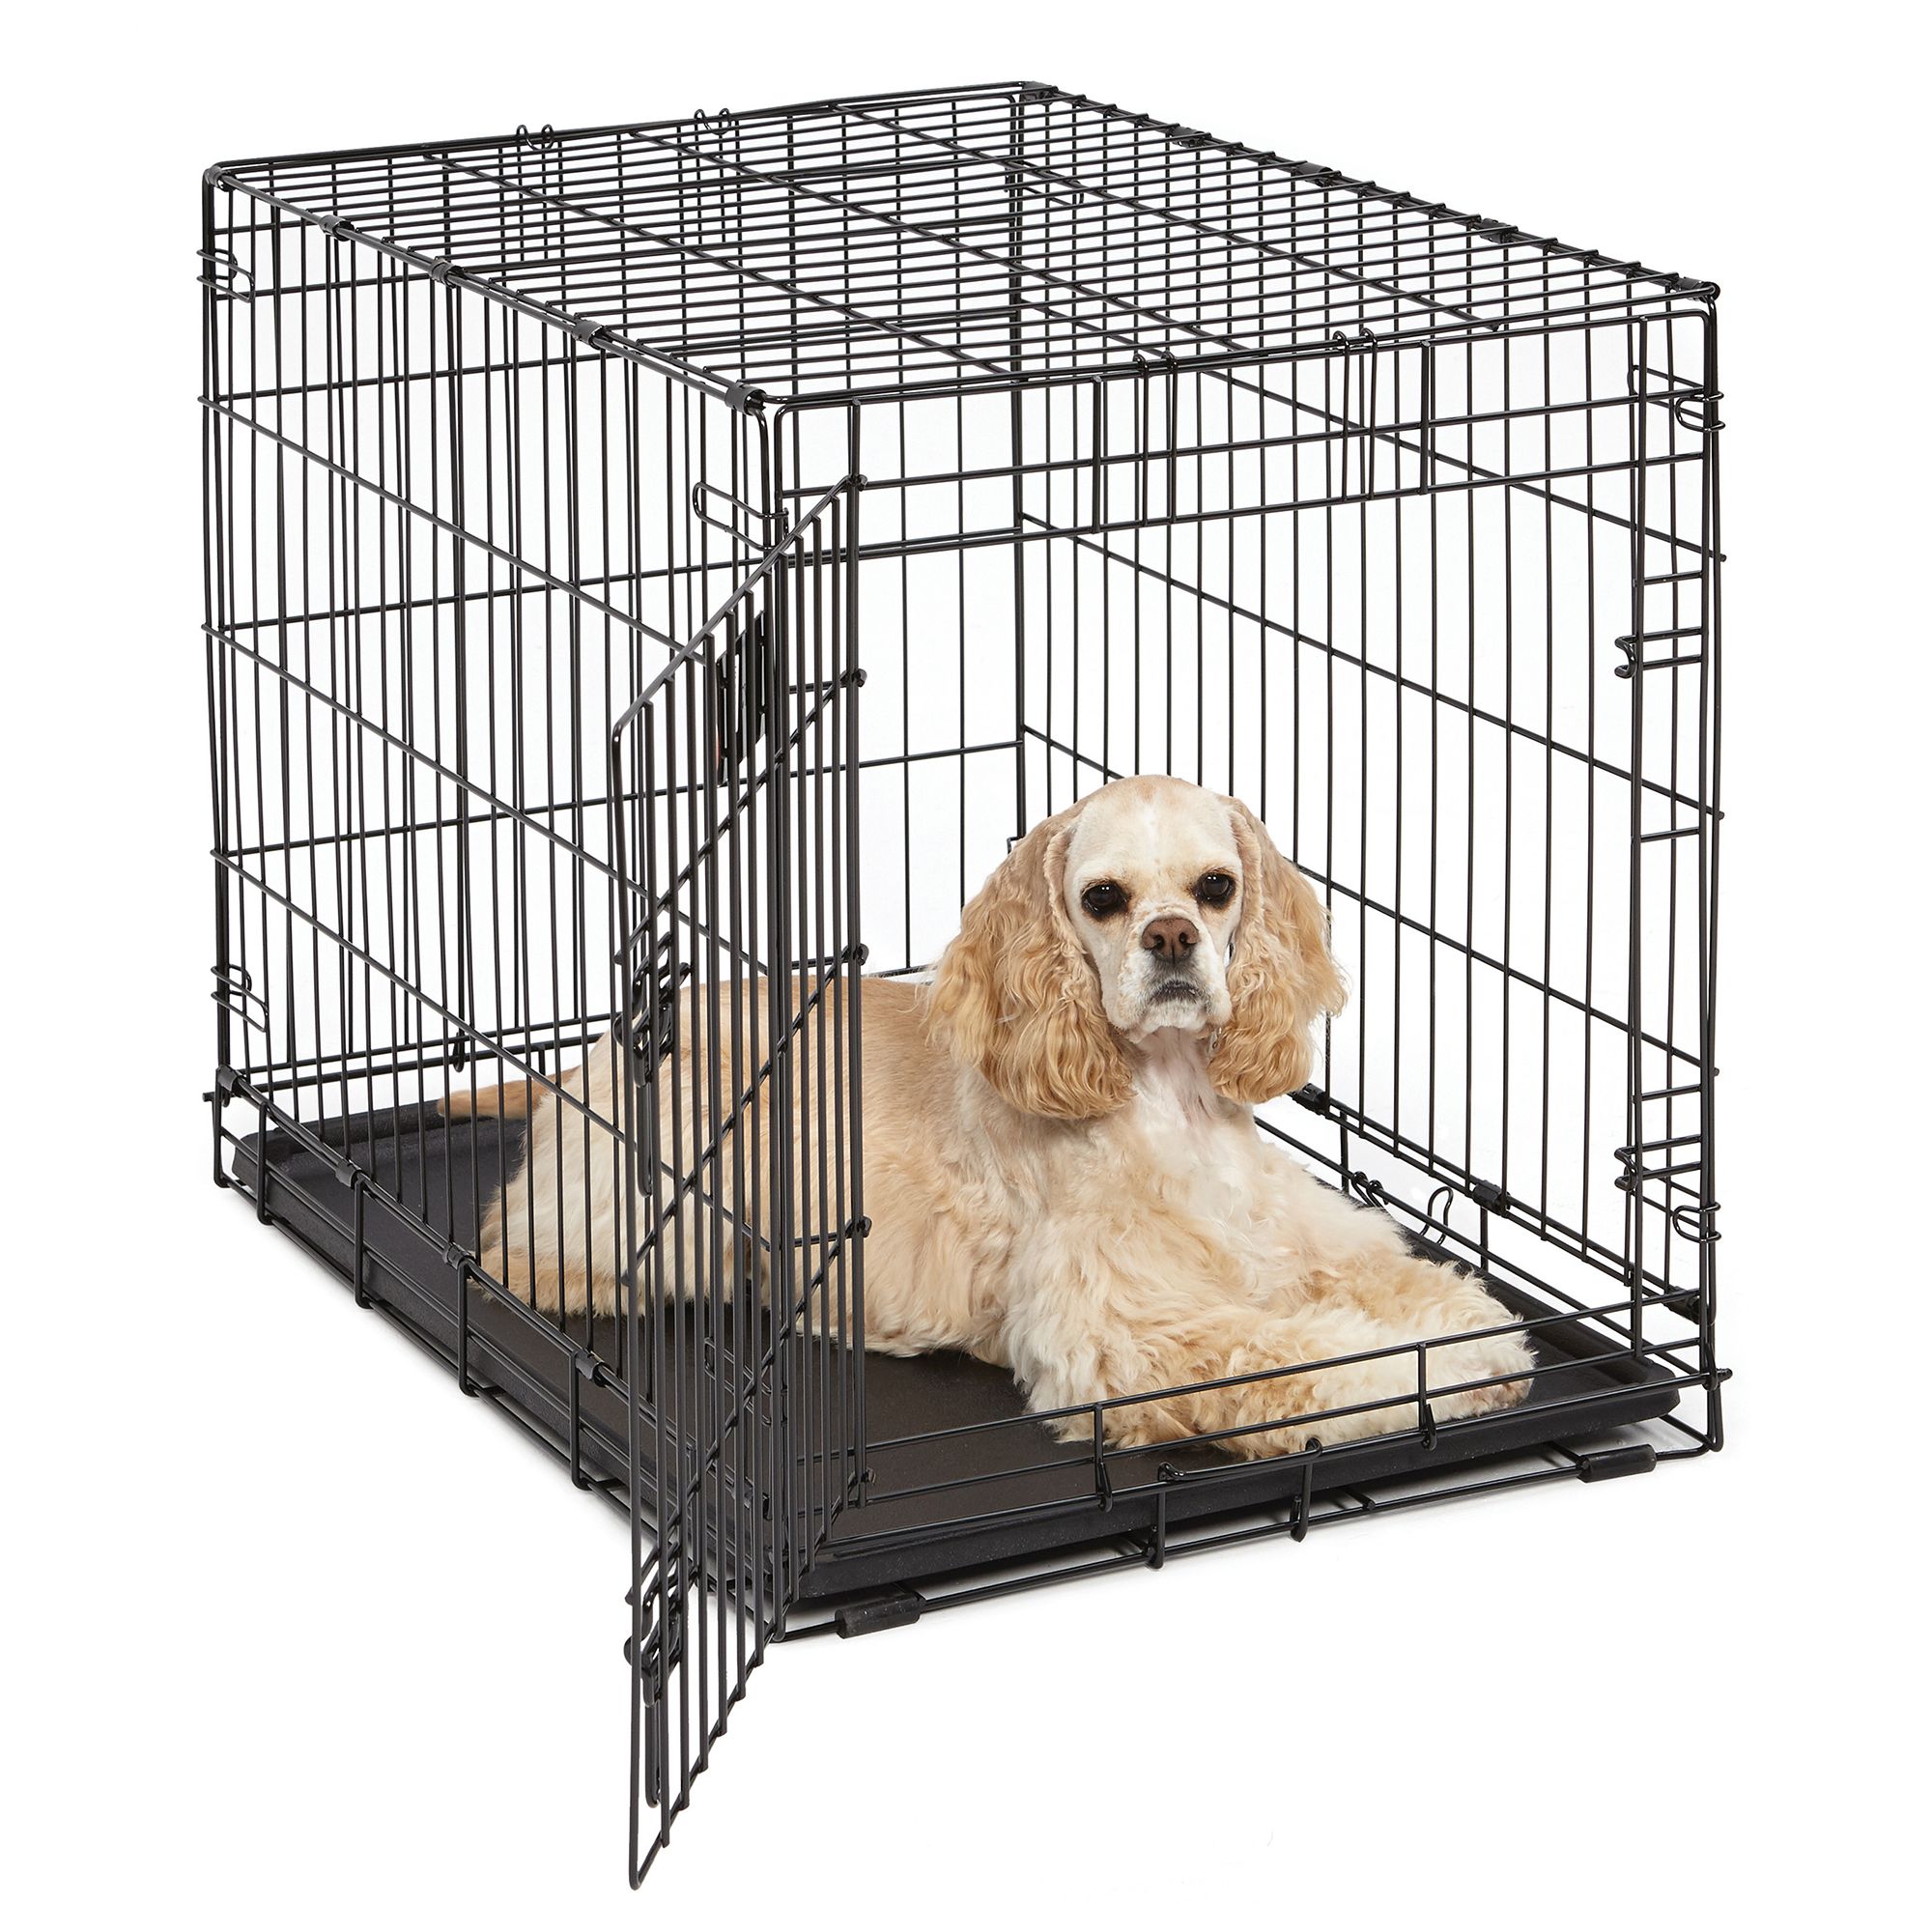 Making Your Dog's Crate Feel Like Home #CrateHappyPets #ad @PetSmart